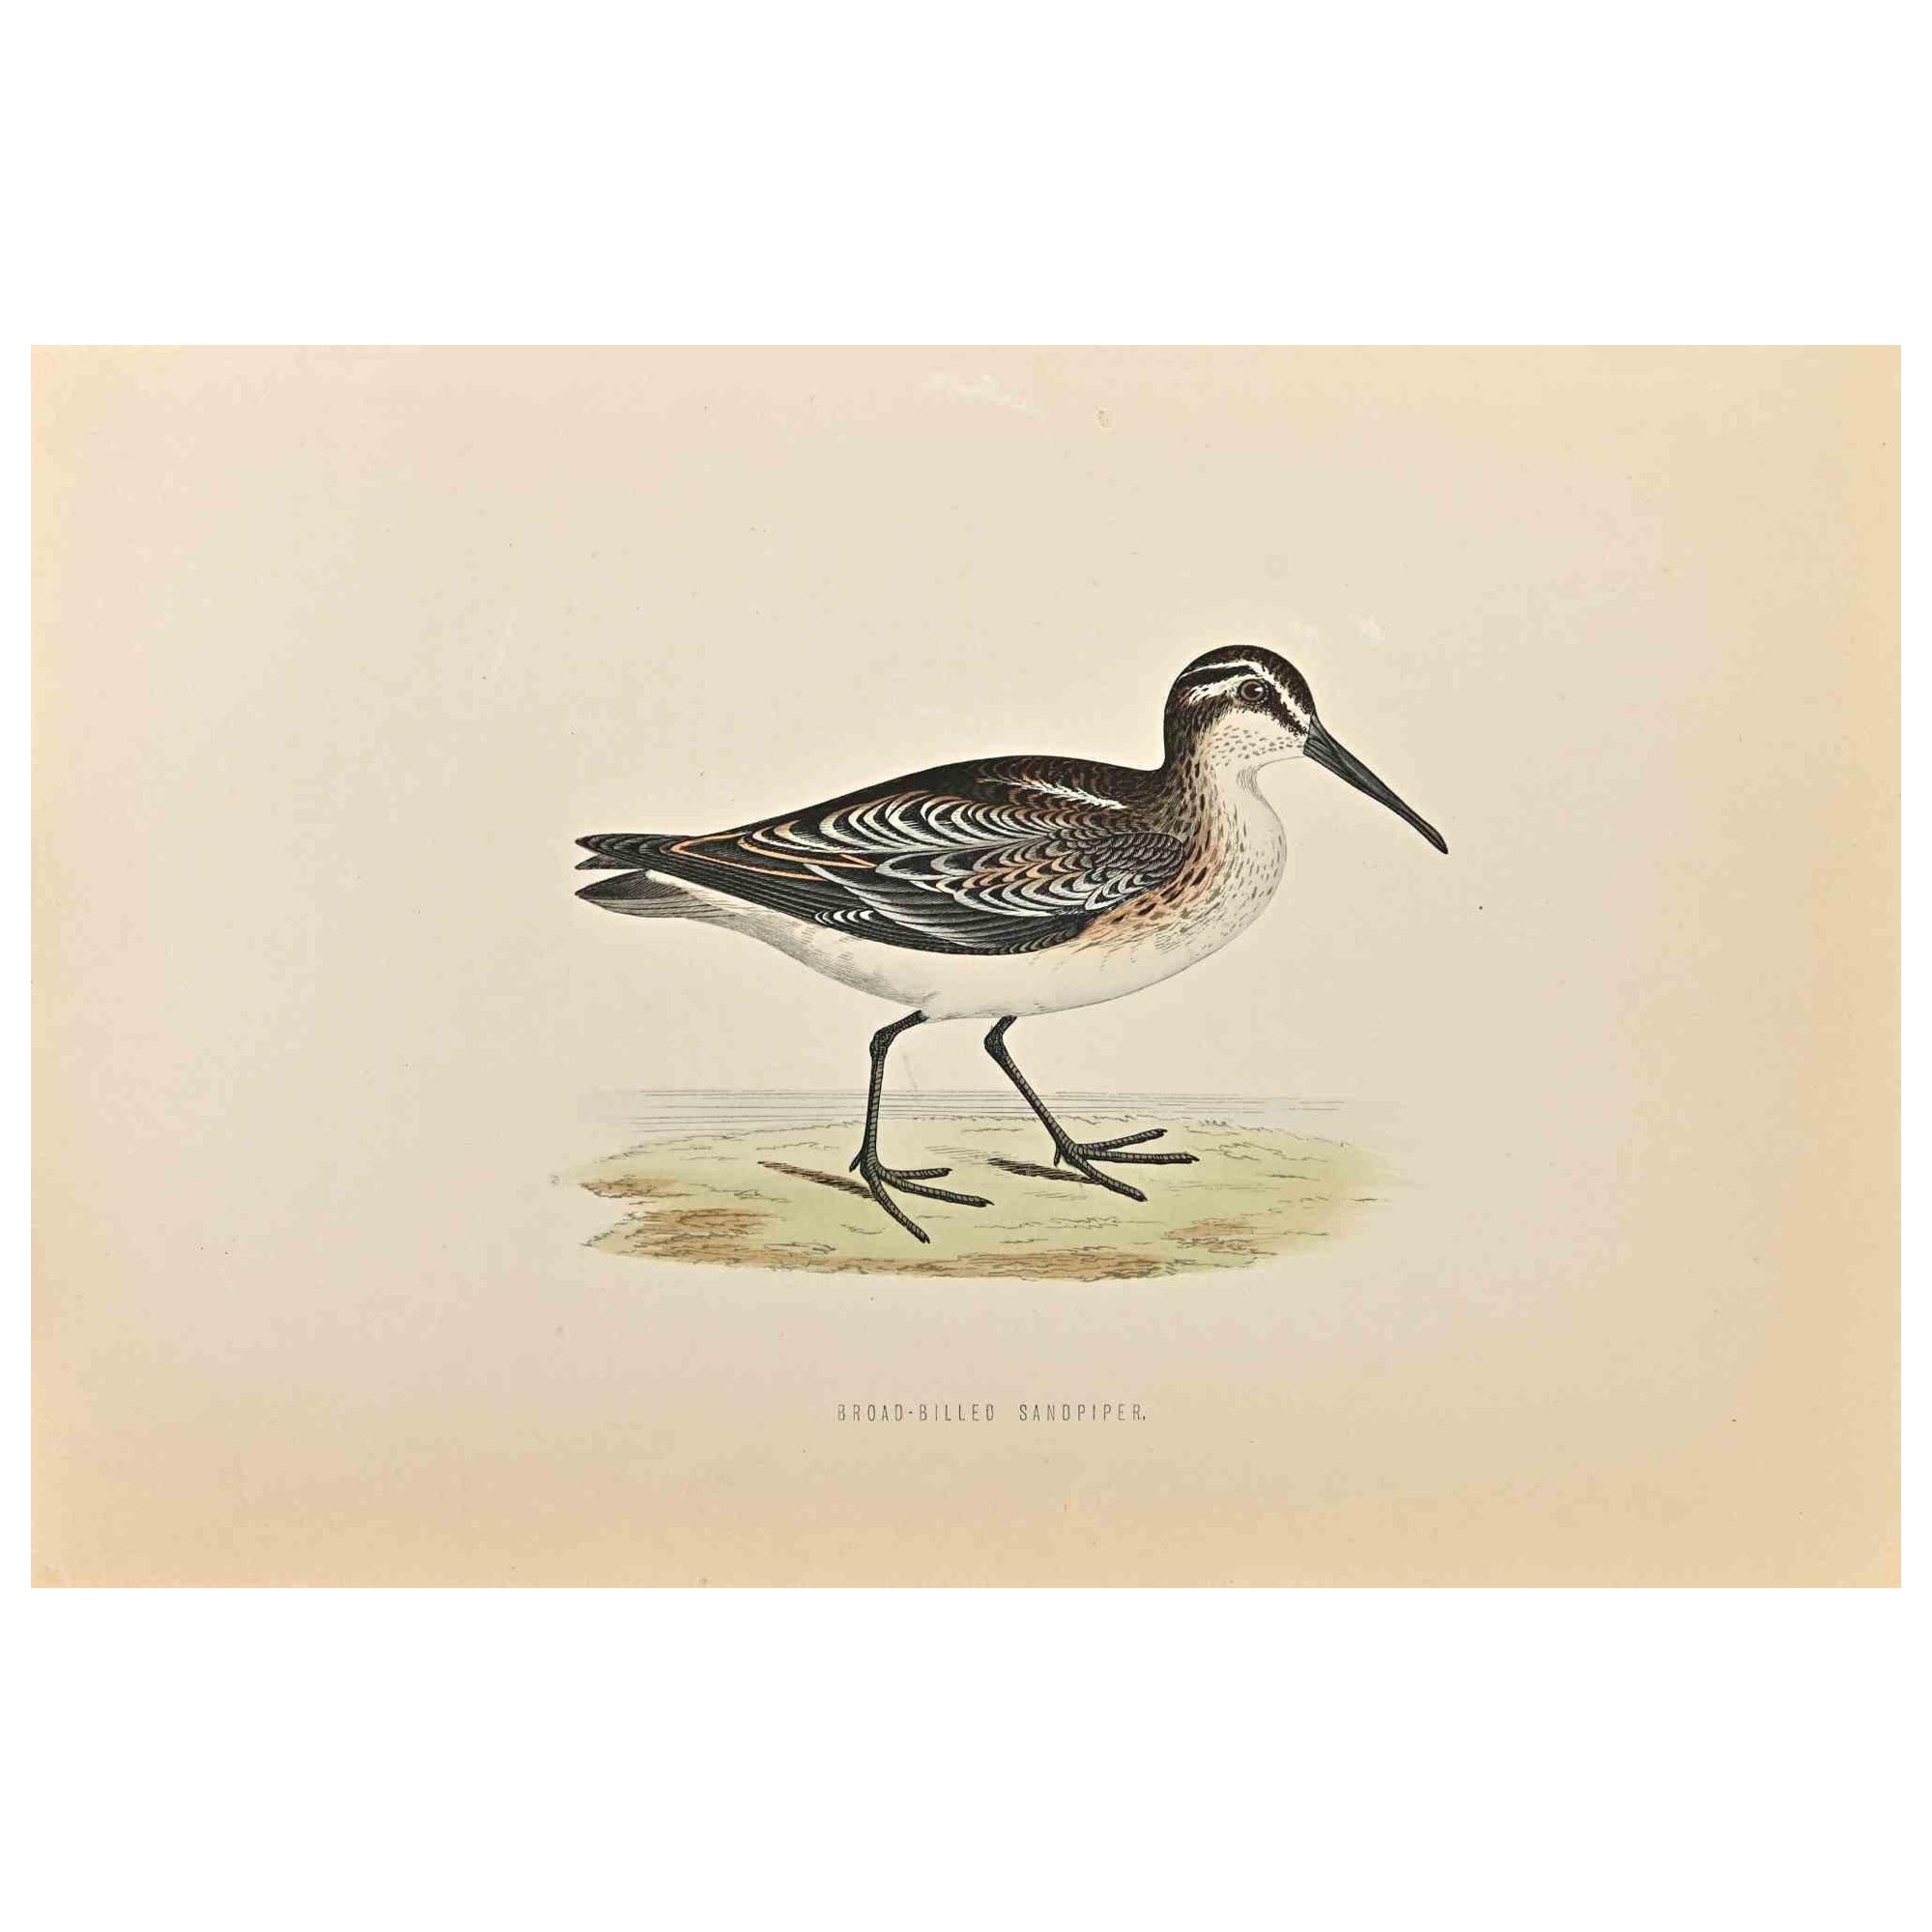 Broad-Billed Sandpiper is a modern artwork realized in 1870 by the British artist Alexander Francis Lydon (1836-1917).

Woodcut print on ivory-colored paper.

Hand-colored, published by London, Bell & Sons, 1870.  

The name of the bird is printed